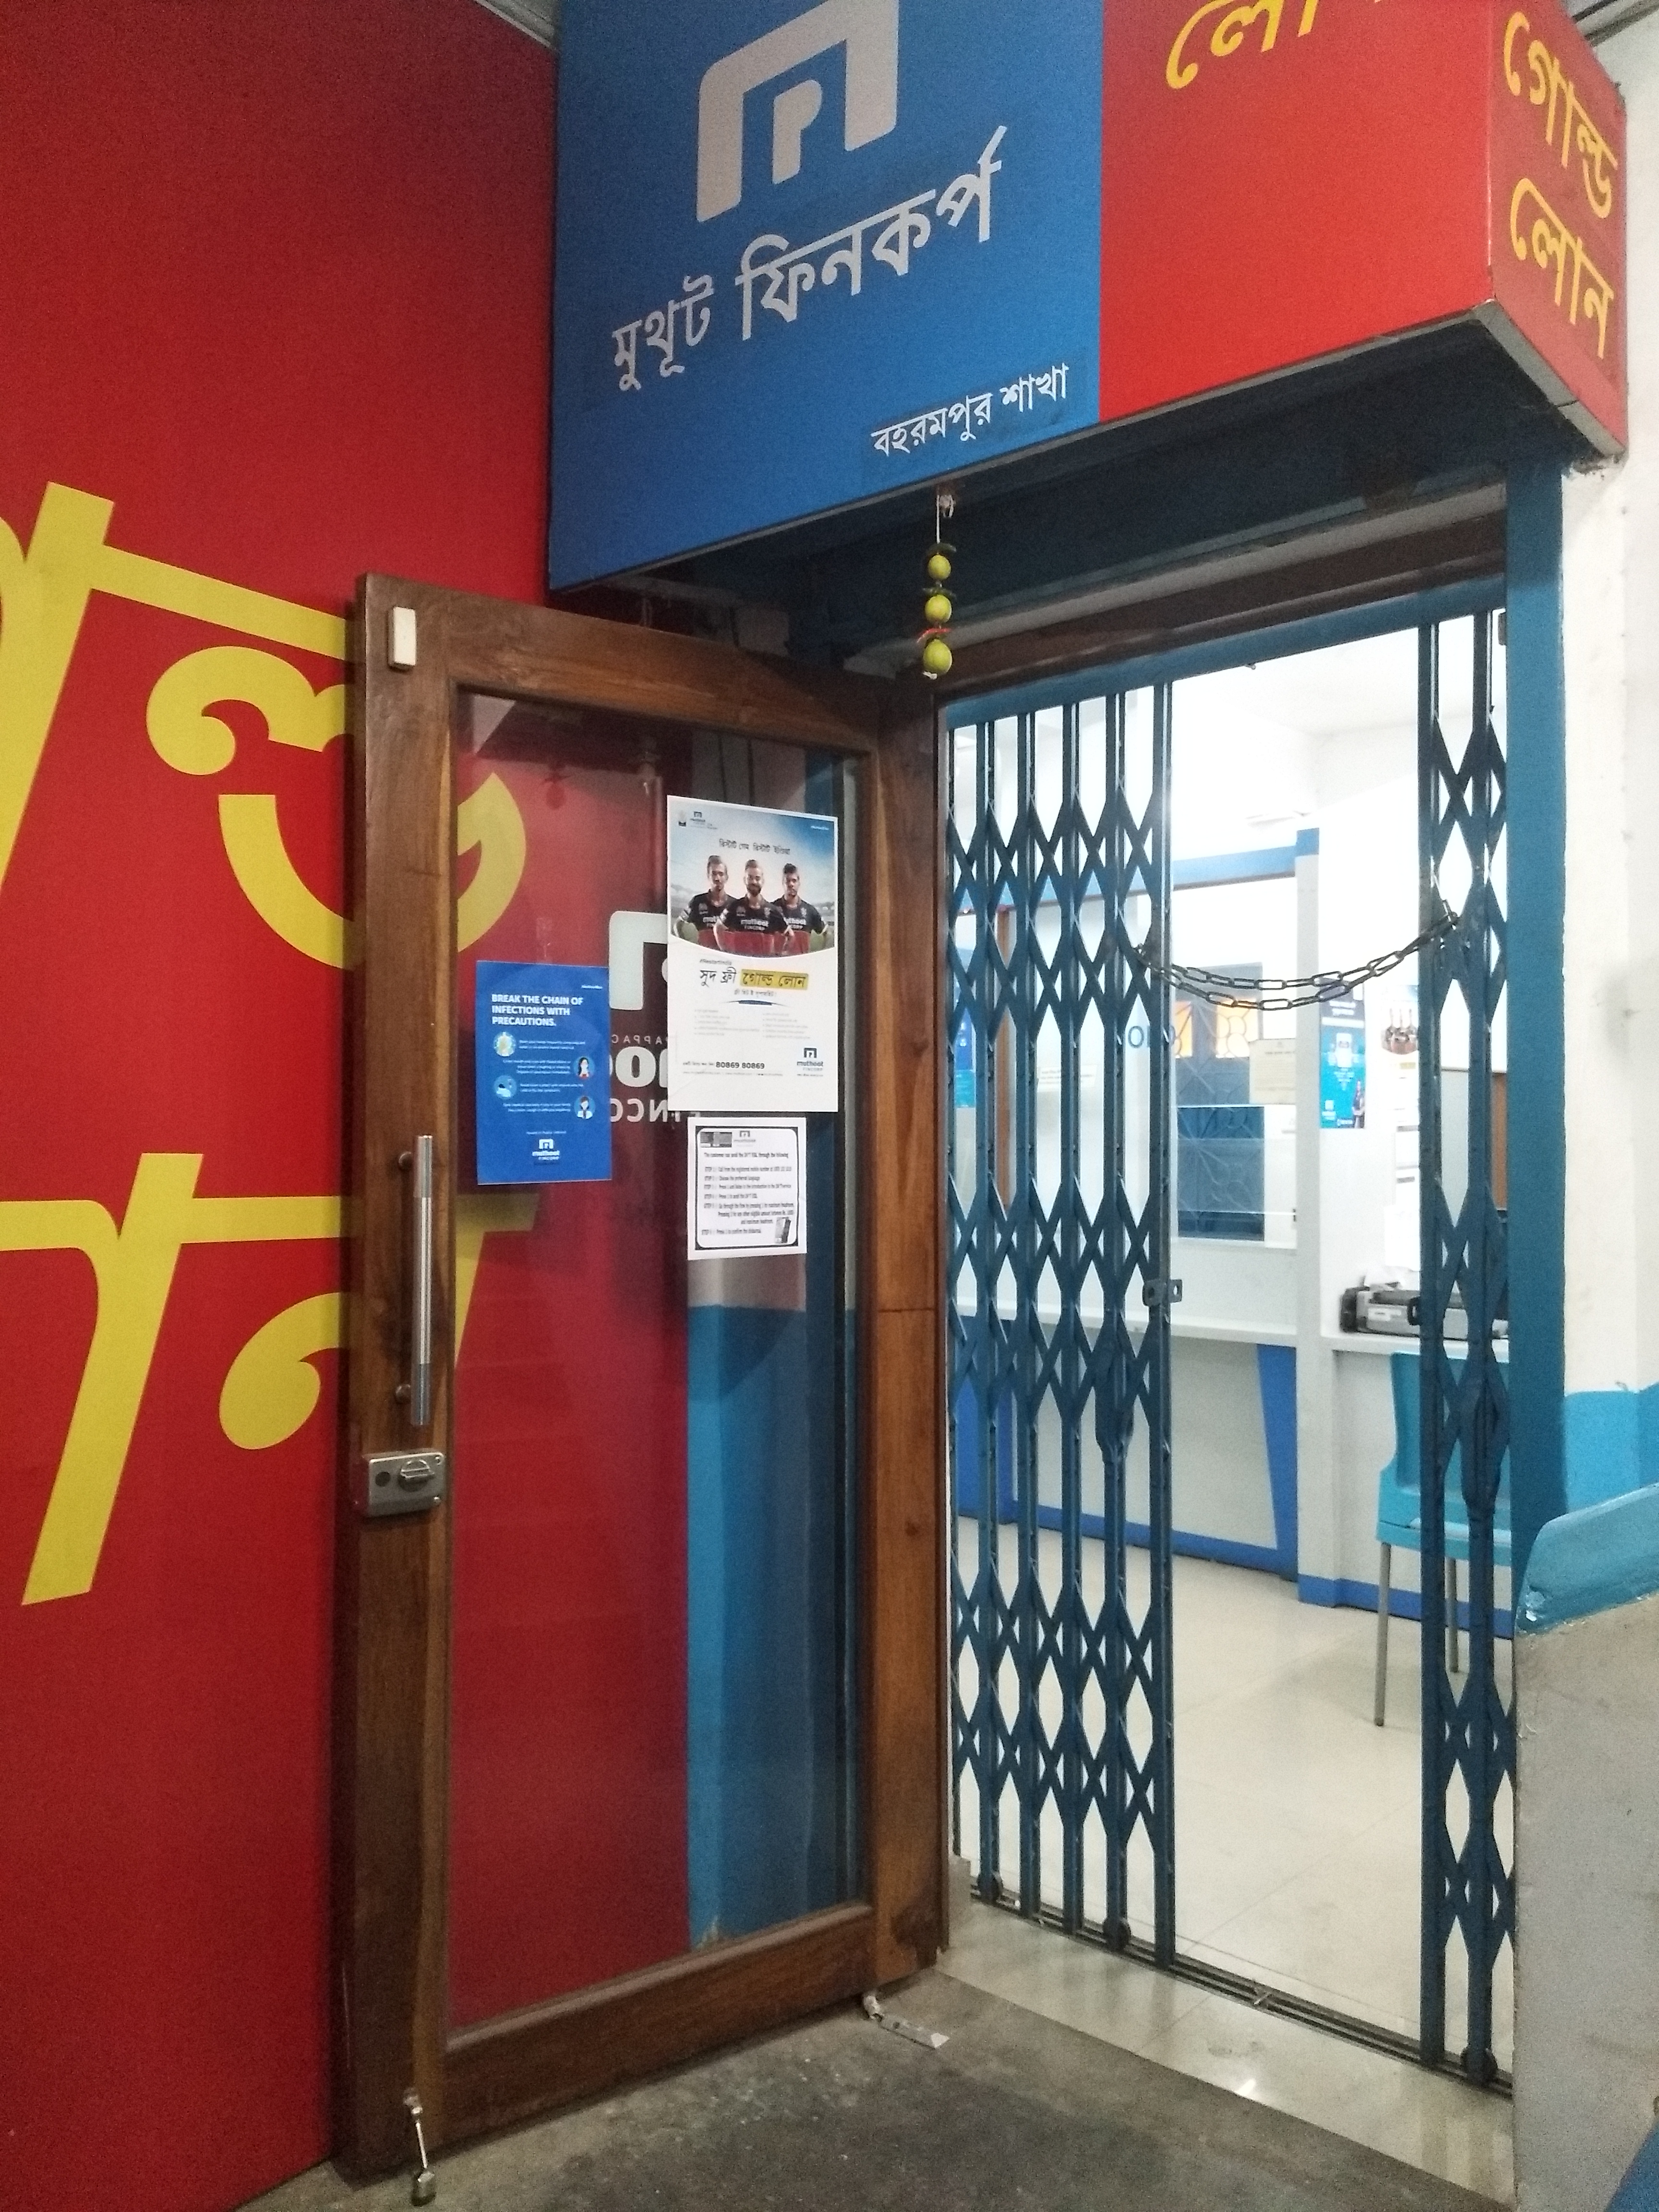 Photos and Videos of Muthoot Fincorp Gold Loan in Murshidabad, Berhampore